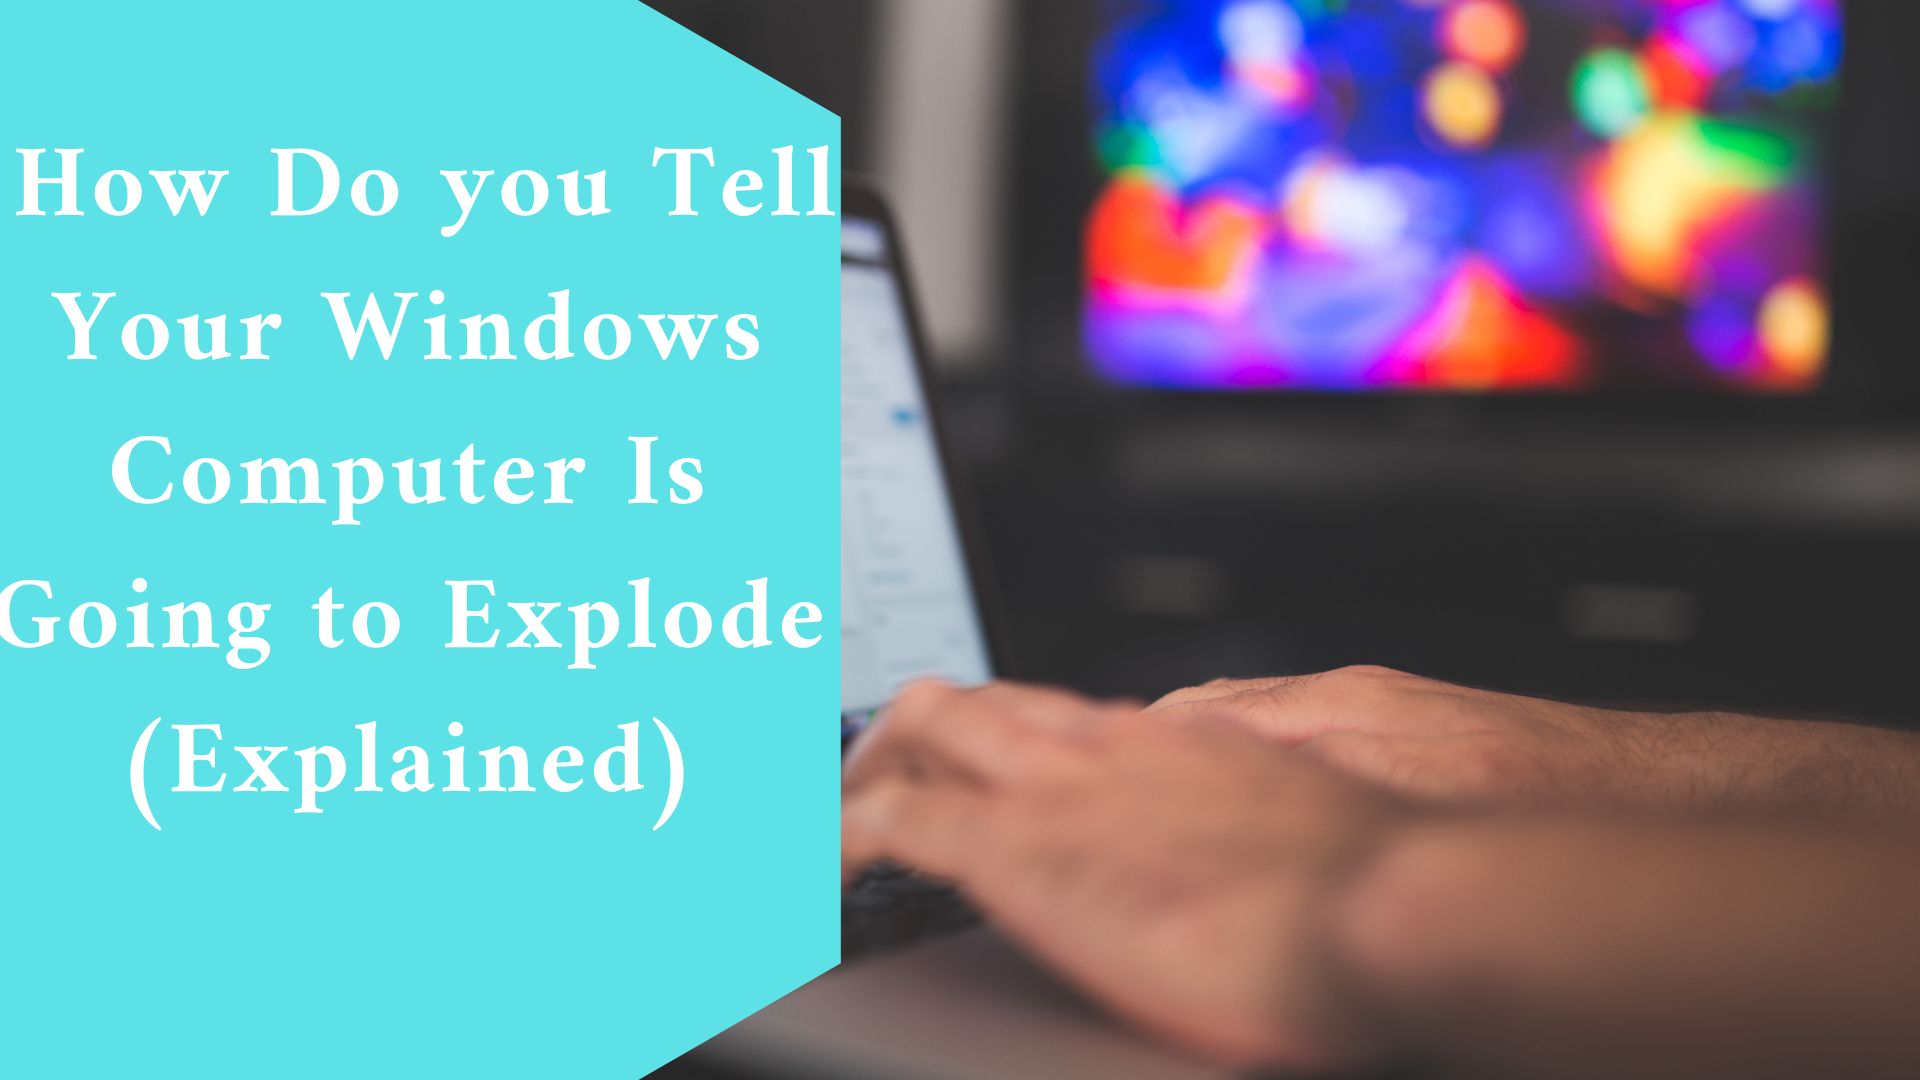 How Do you Tell Your Windows Computer Is Going to Explode (Explained)